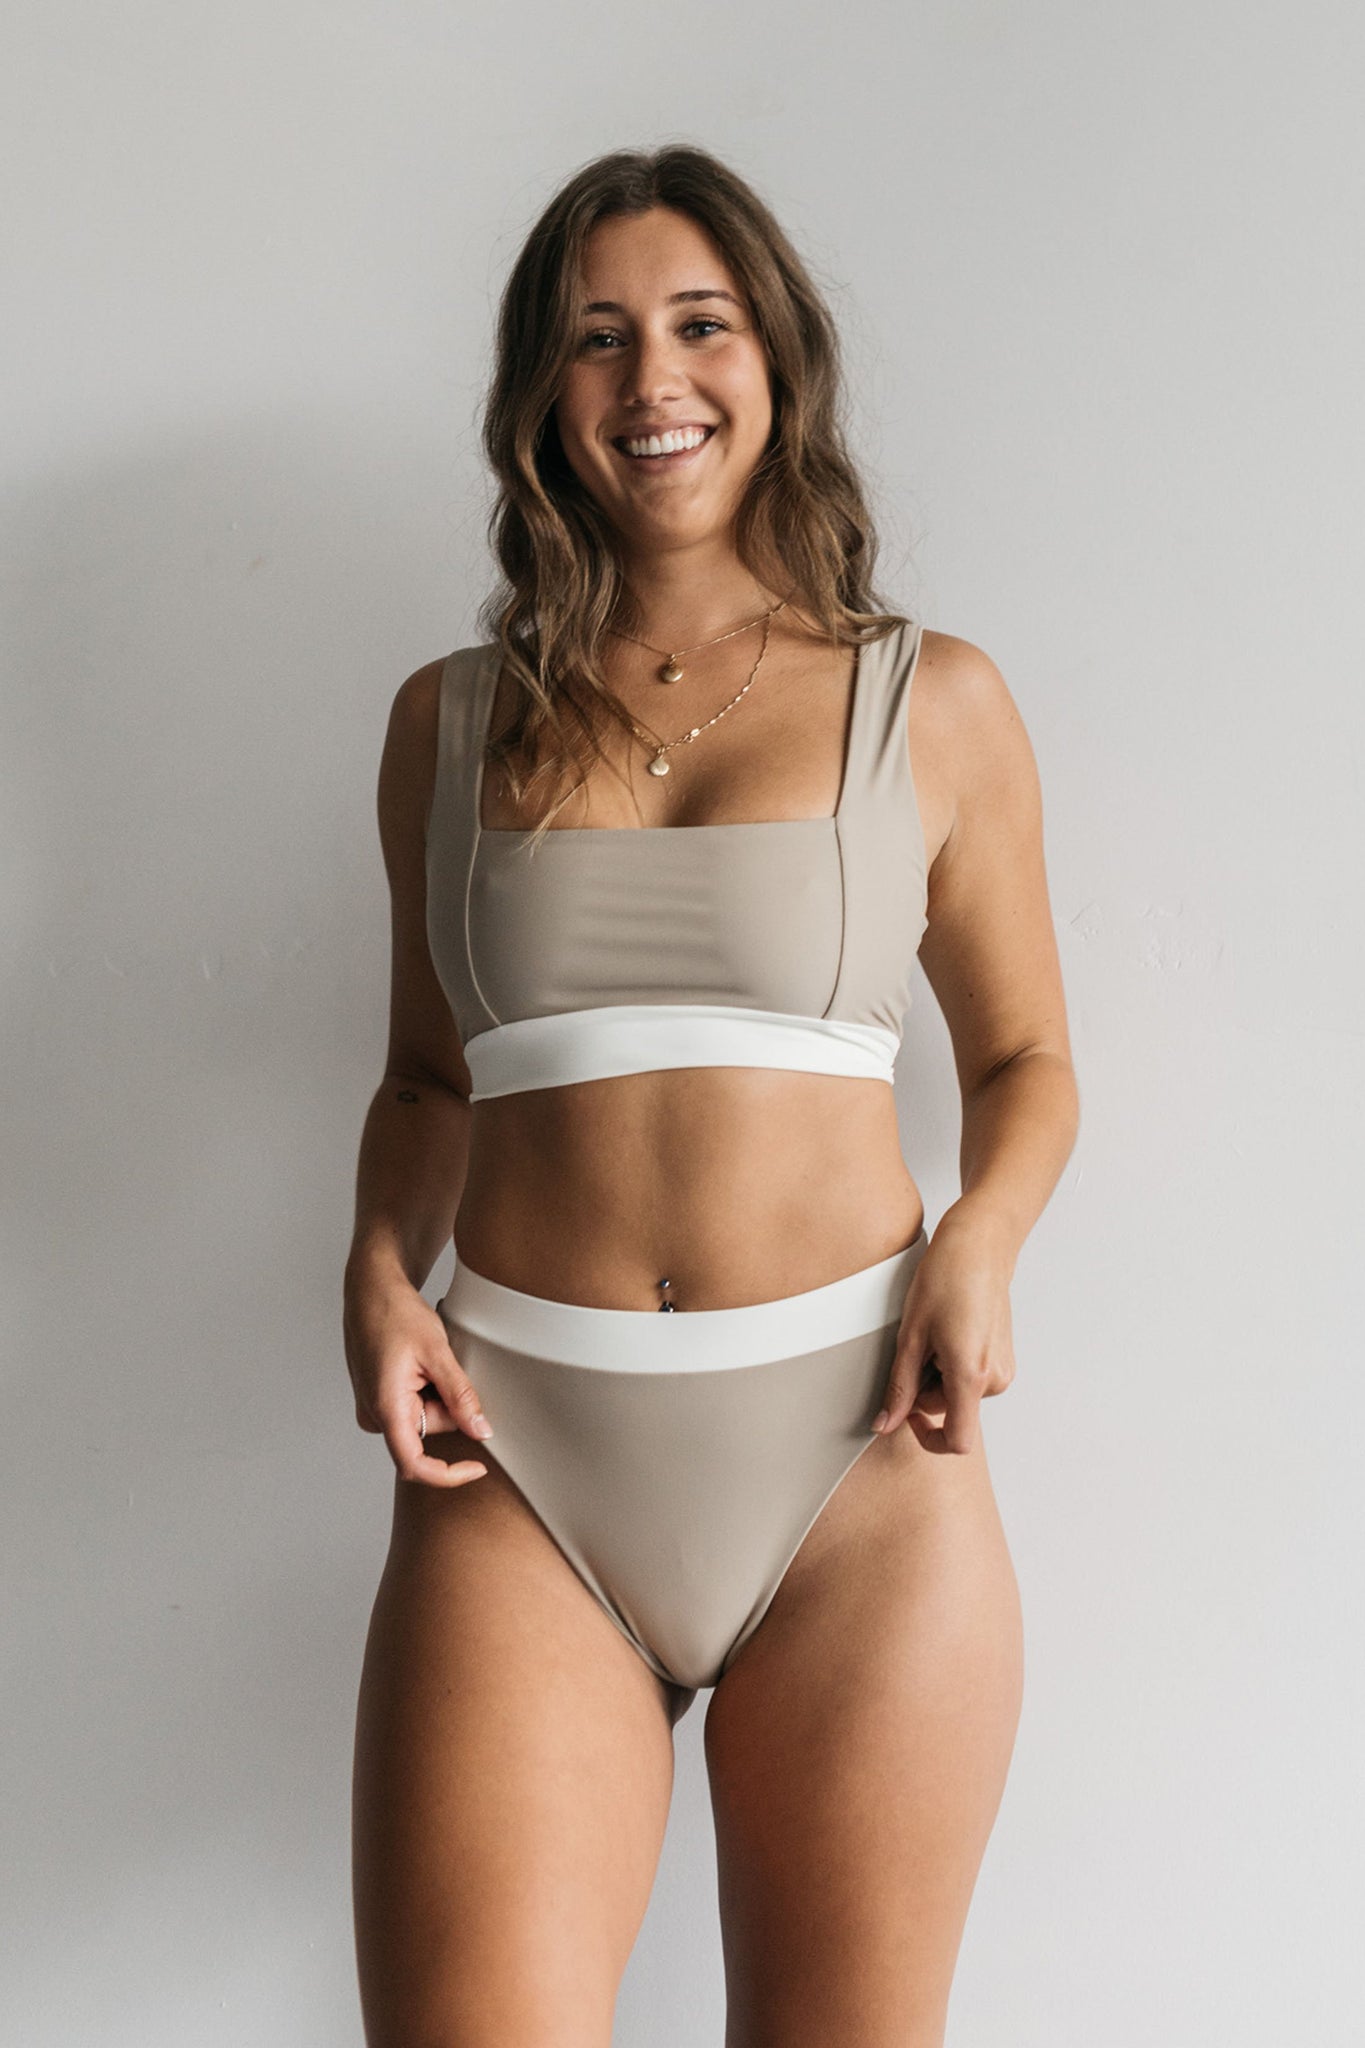 A woman smiling with her hands on her hips wearing beige bikini bottoms with a white waistband and a matching beige and white bikini top with a square neckline.